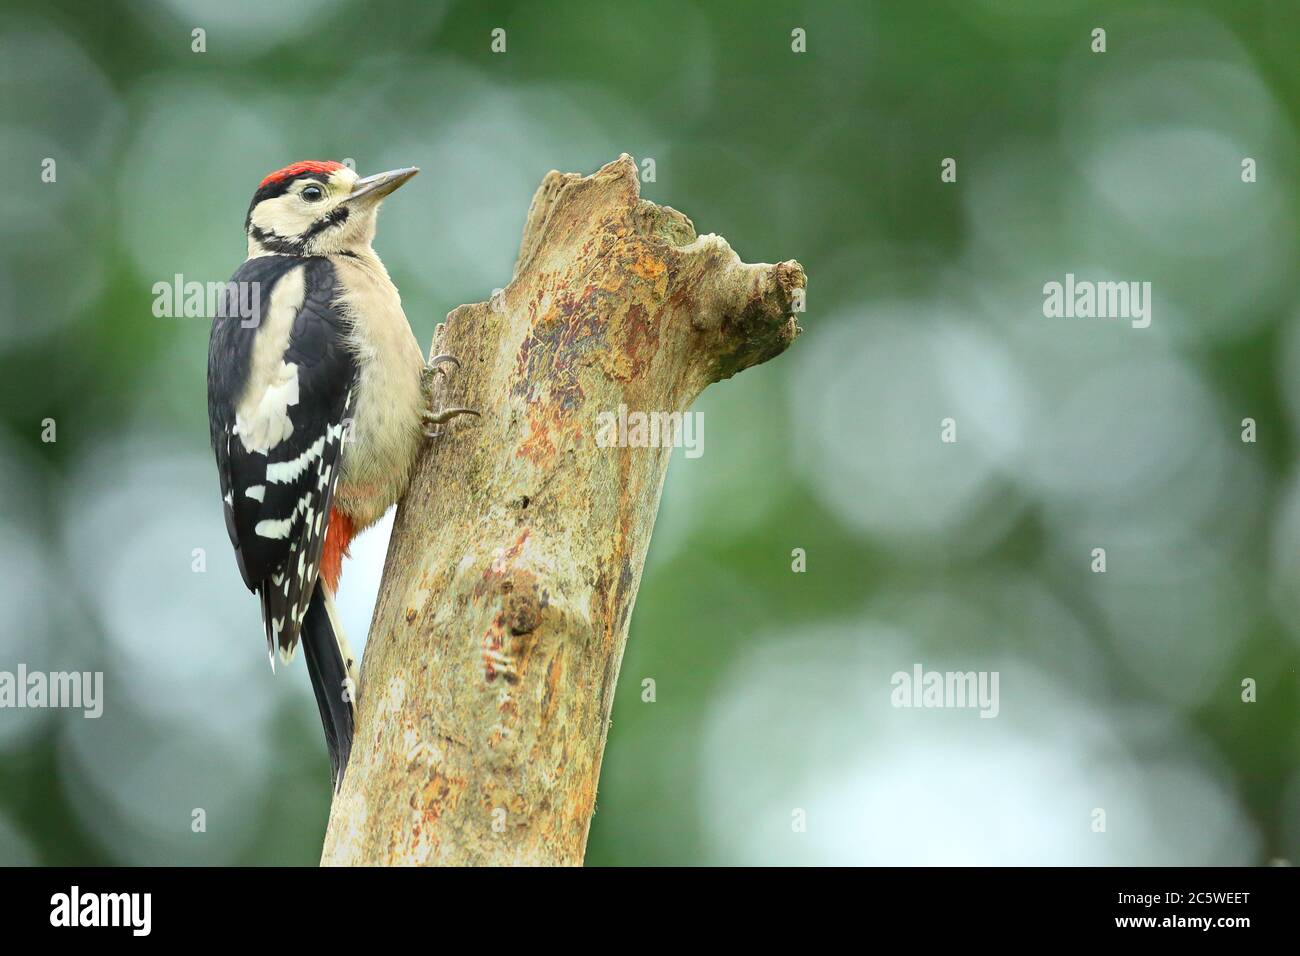 Juvenile Great Spotted Woodpecker (Dendrocopos major) climbing on tree stump, showing immature plumage. Green Oak Woodland background. June 2020 Stock Photo